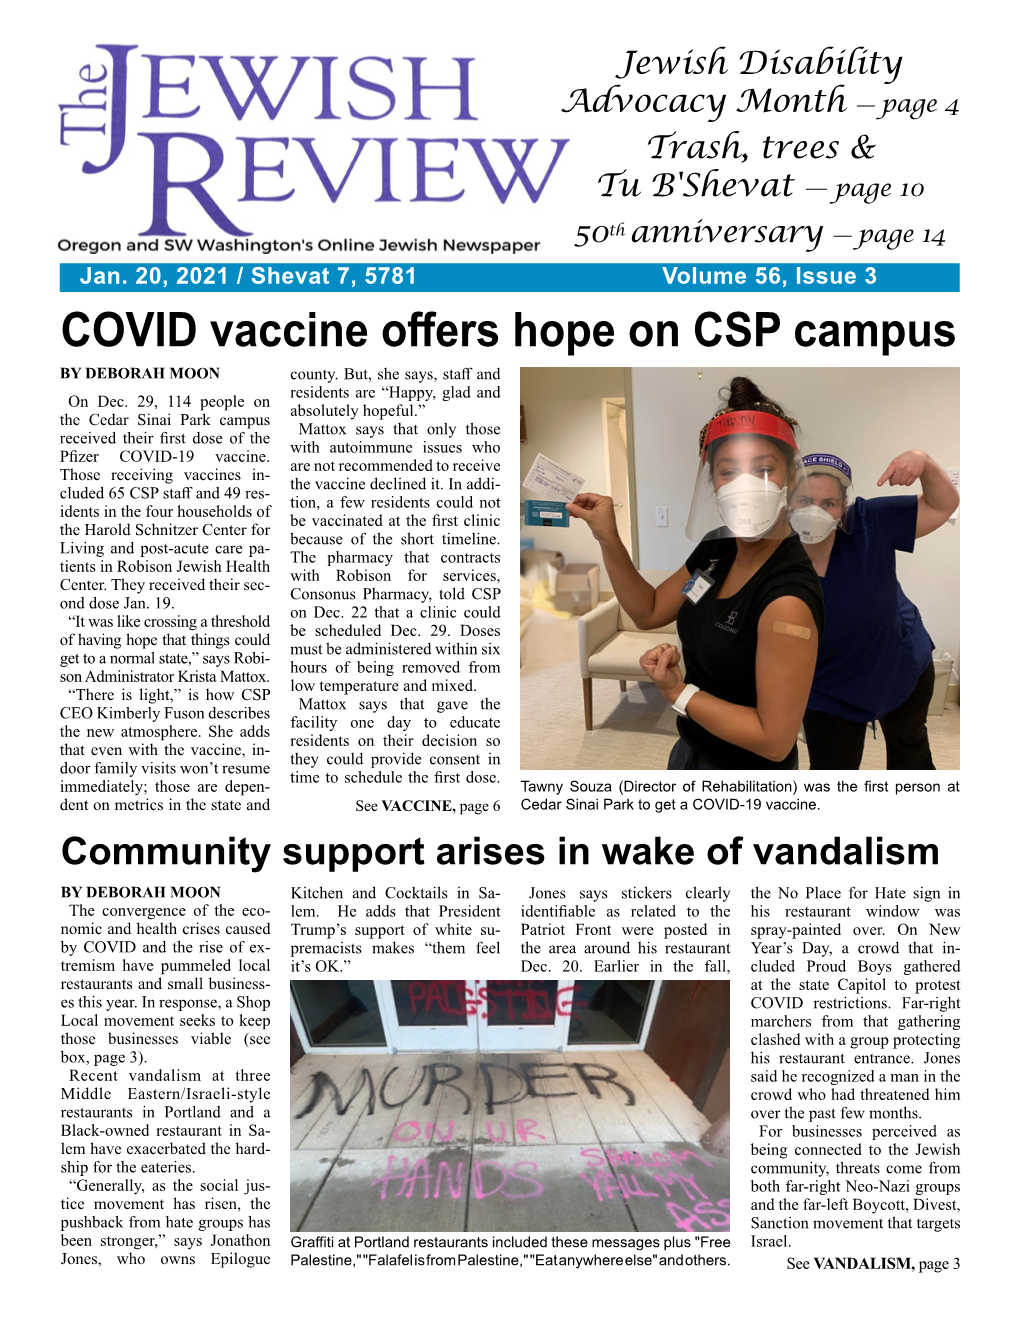 COVID Vaccine Offers Hope on CSP Campus by DEBORAH MOON County